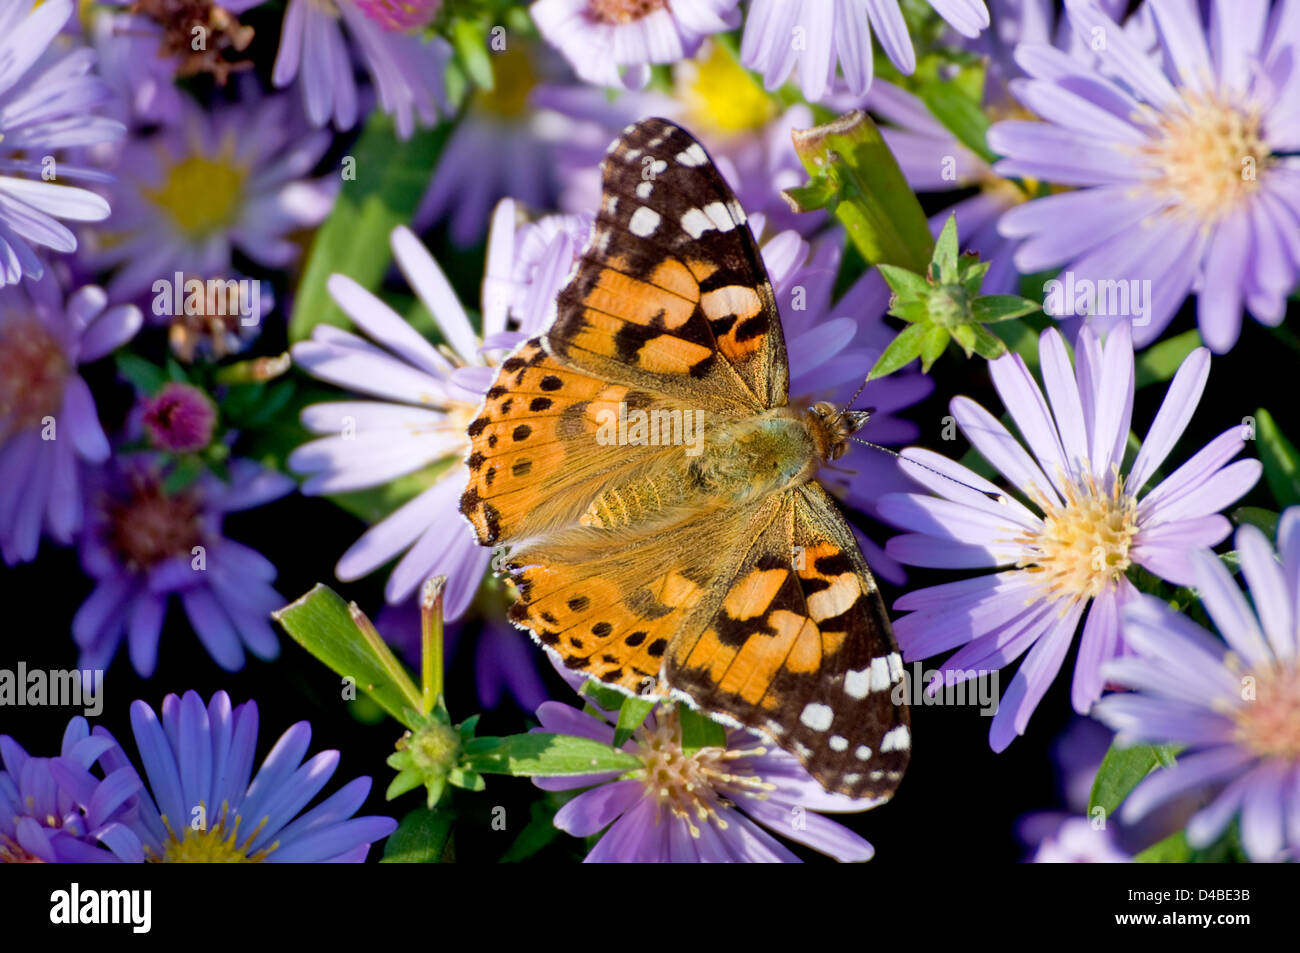 The butterfly sits on a blue flower Stock Photo